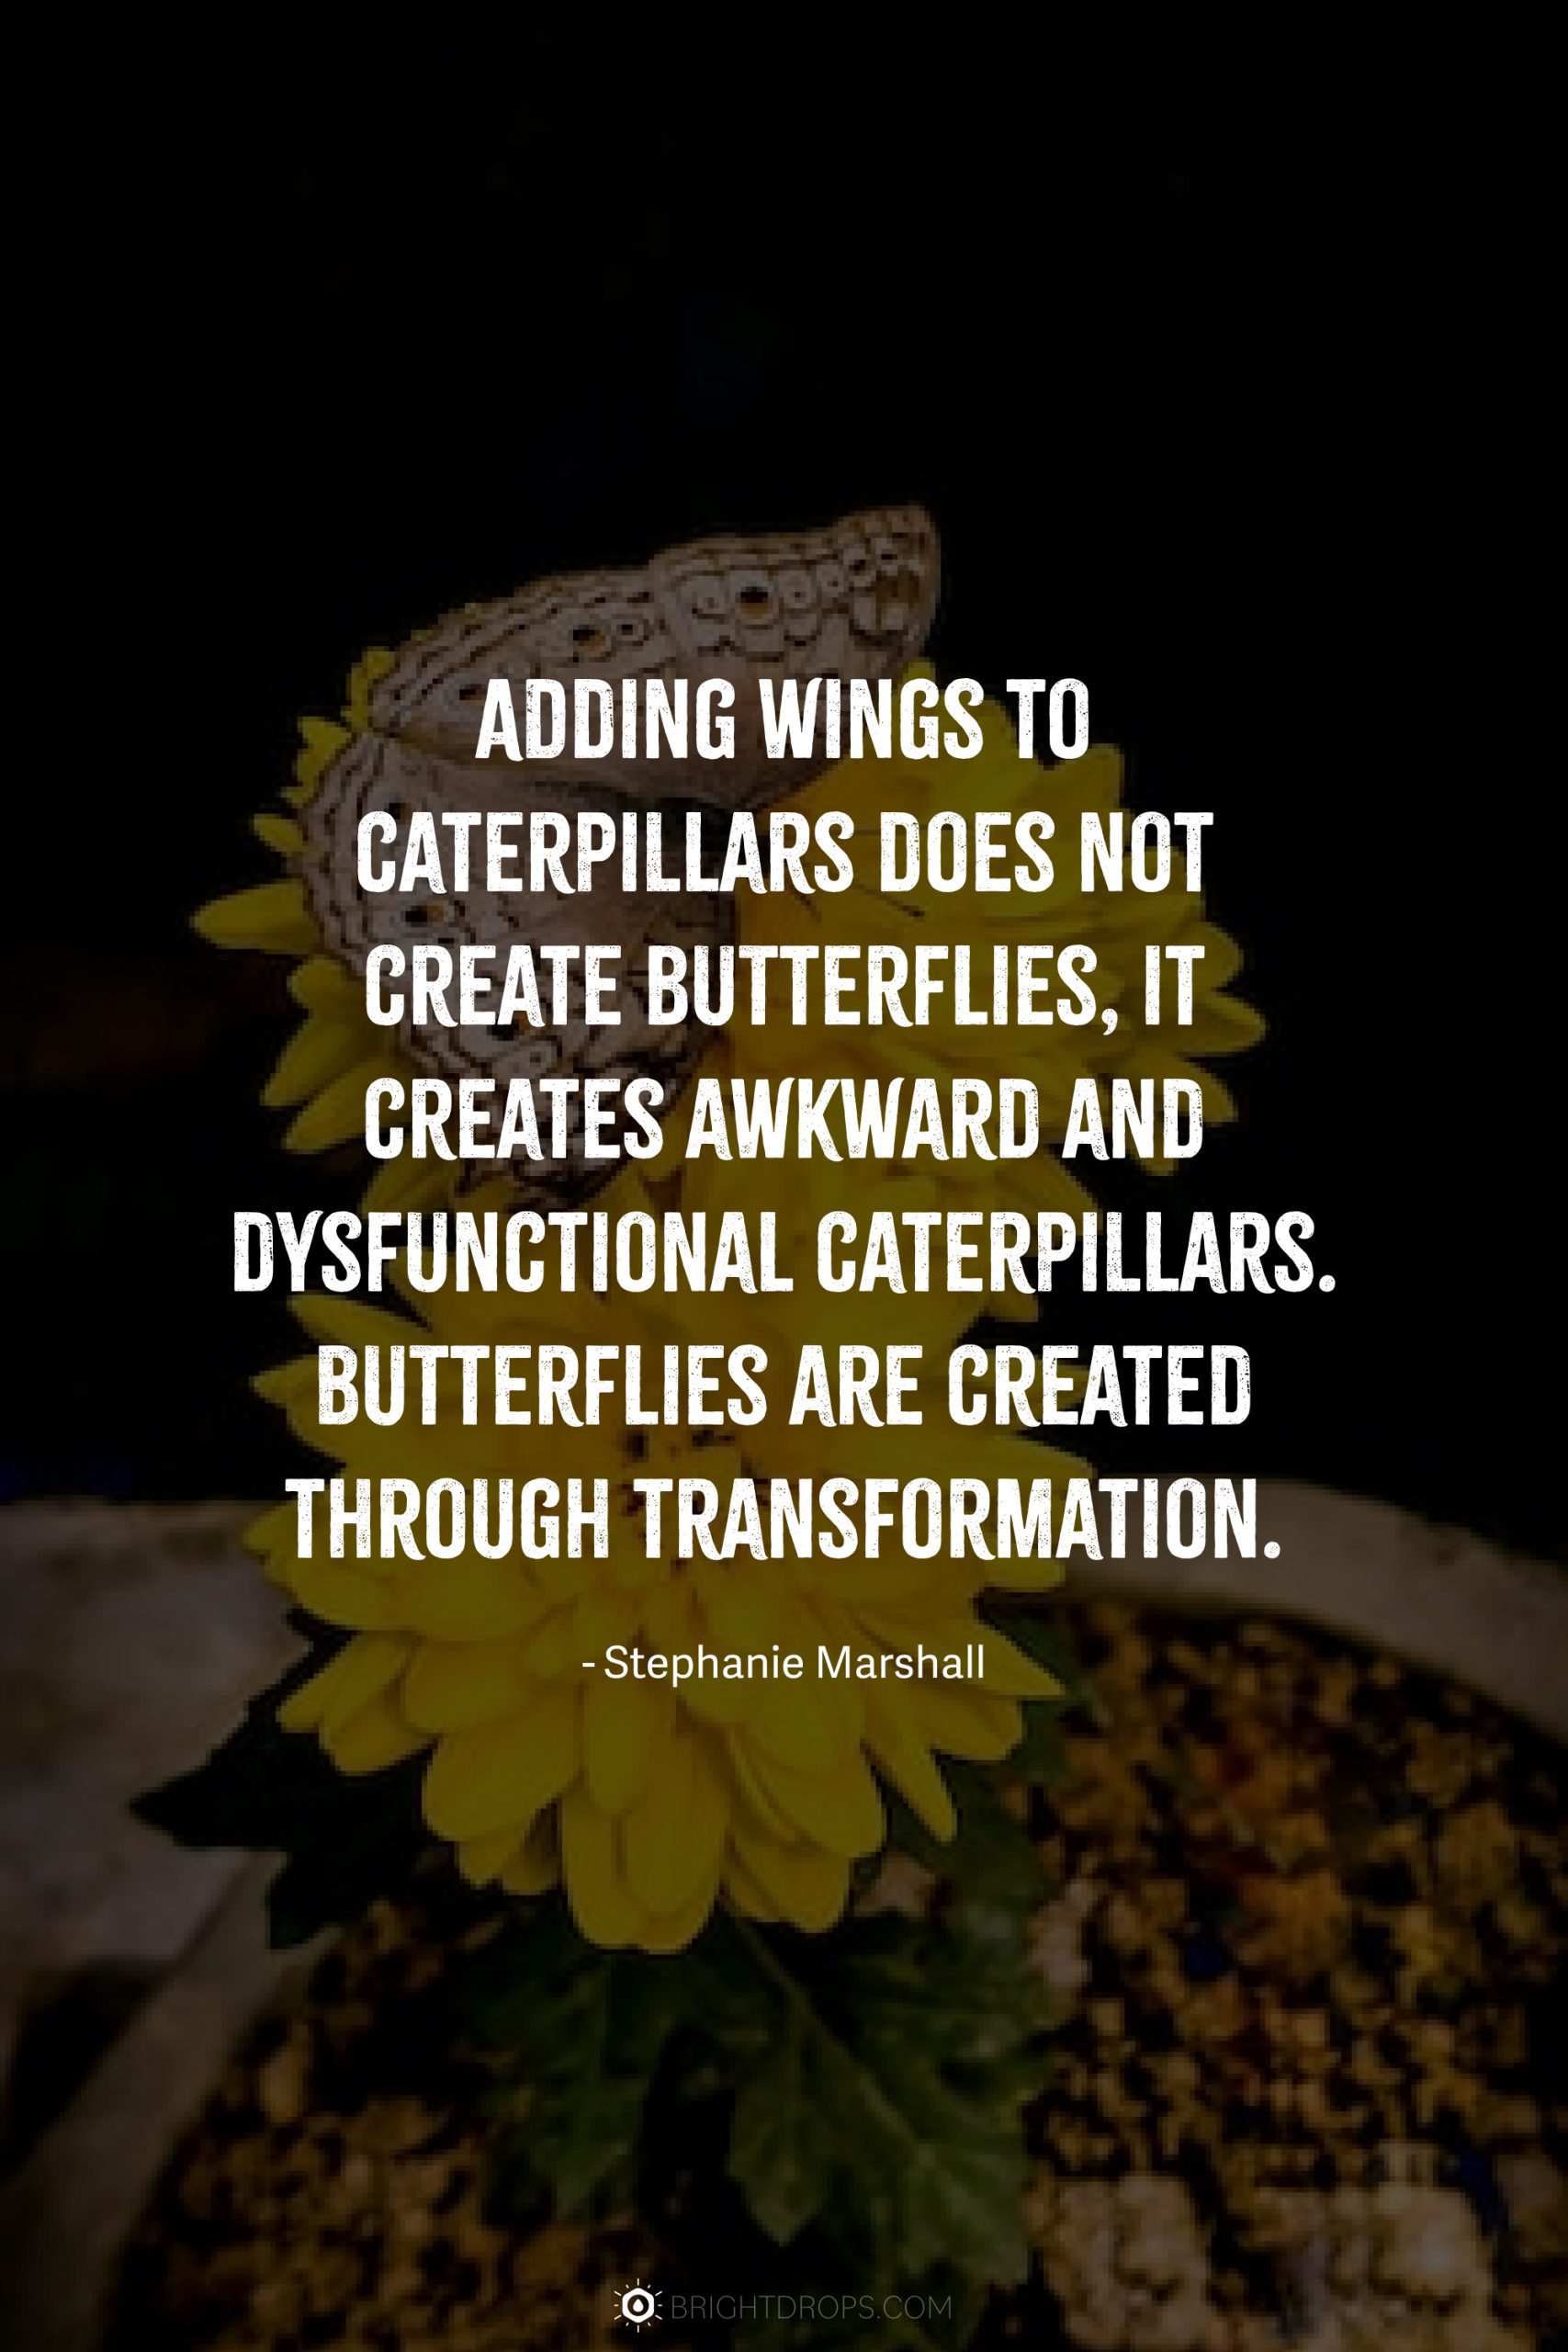 Adding wings to caterpillars does not create butterflies, it creates awkward and dysfunctional caterpillars. Butterflies are created through transformation.